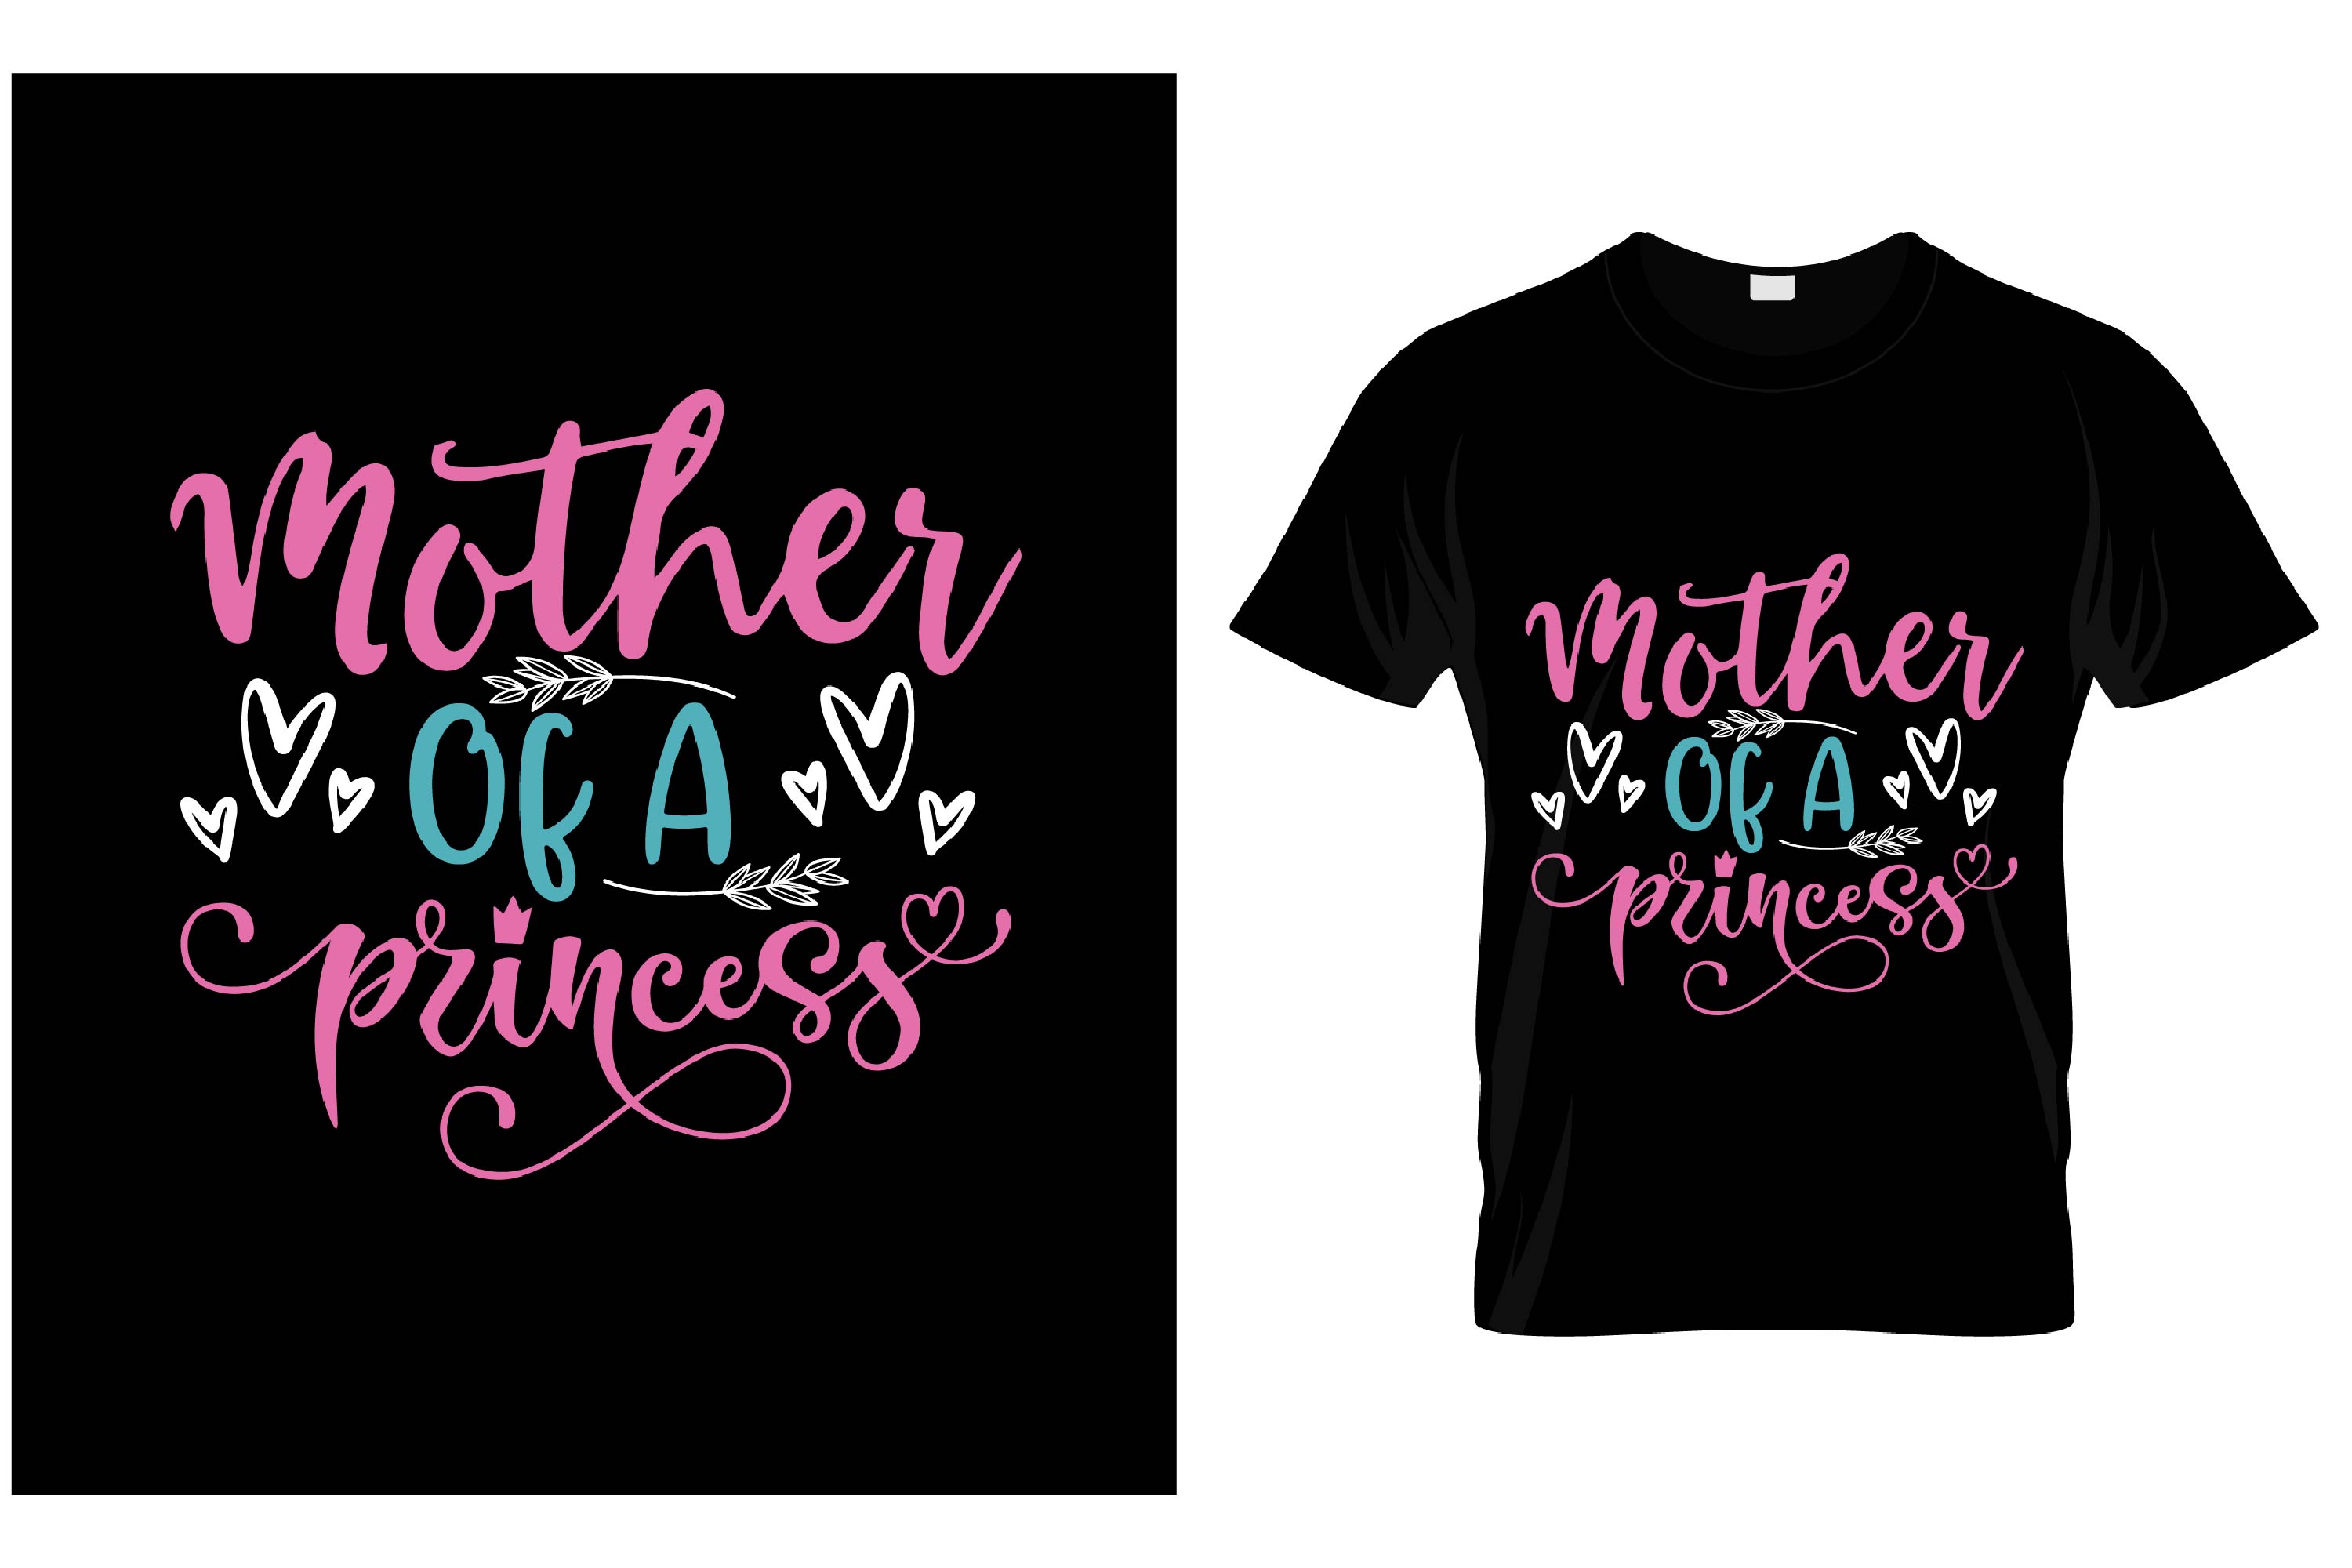 Image of a black t-shirt with a gorgeous print in pink and blue about mom.